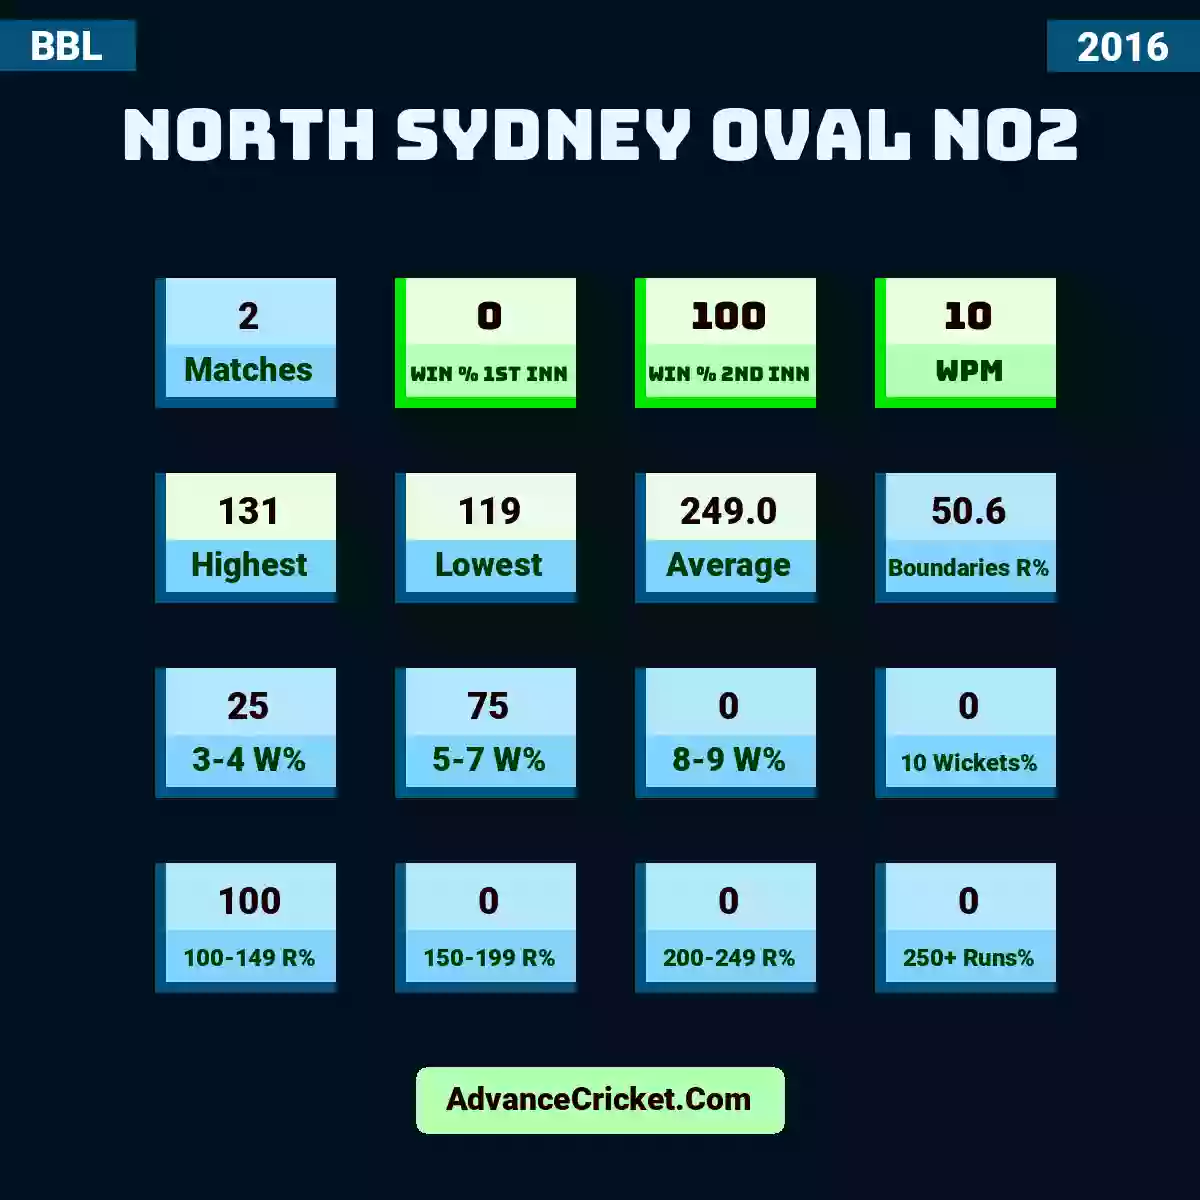 Image showing North Sydney Oval No2 with Matches: 2, Win % 1st Inn: 0, Win % 2nd Inn: 100, WPM: 10, Highest: 131, Lowest: 119, Average: 249.0, Boundaries R%: 50.6, 3-4 W%: 25, 5-7 W%: 75, 8-9 W%: 0, 10 Wickets%: 0, 100-149 R%: 100, 150-199 R%: 0, 200-249 R%: 0, 250+ Runs%: 0.